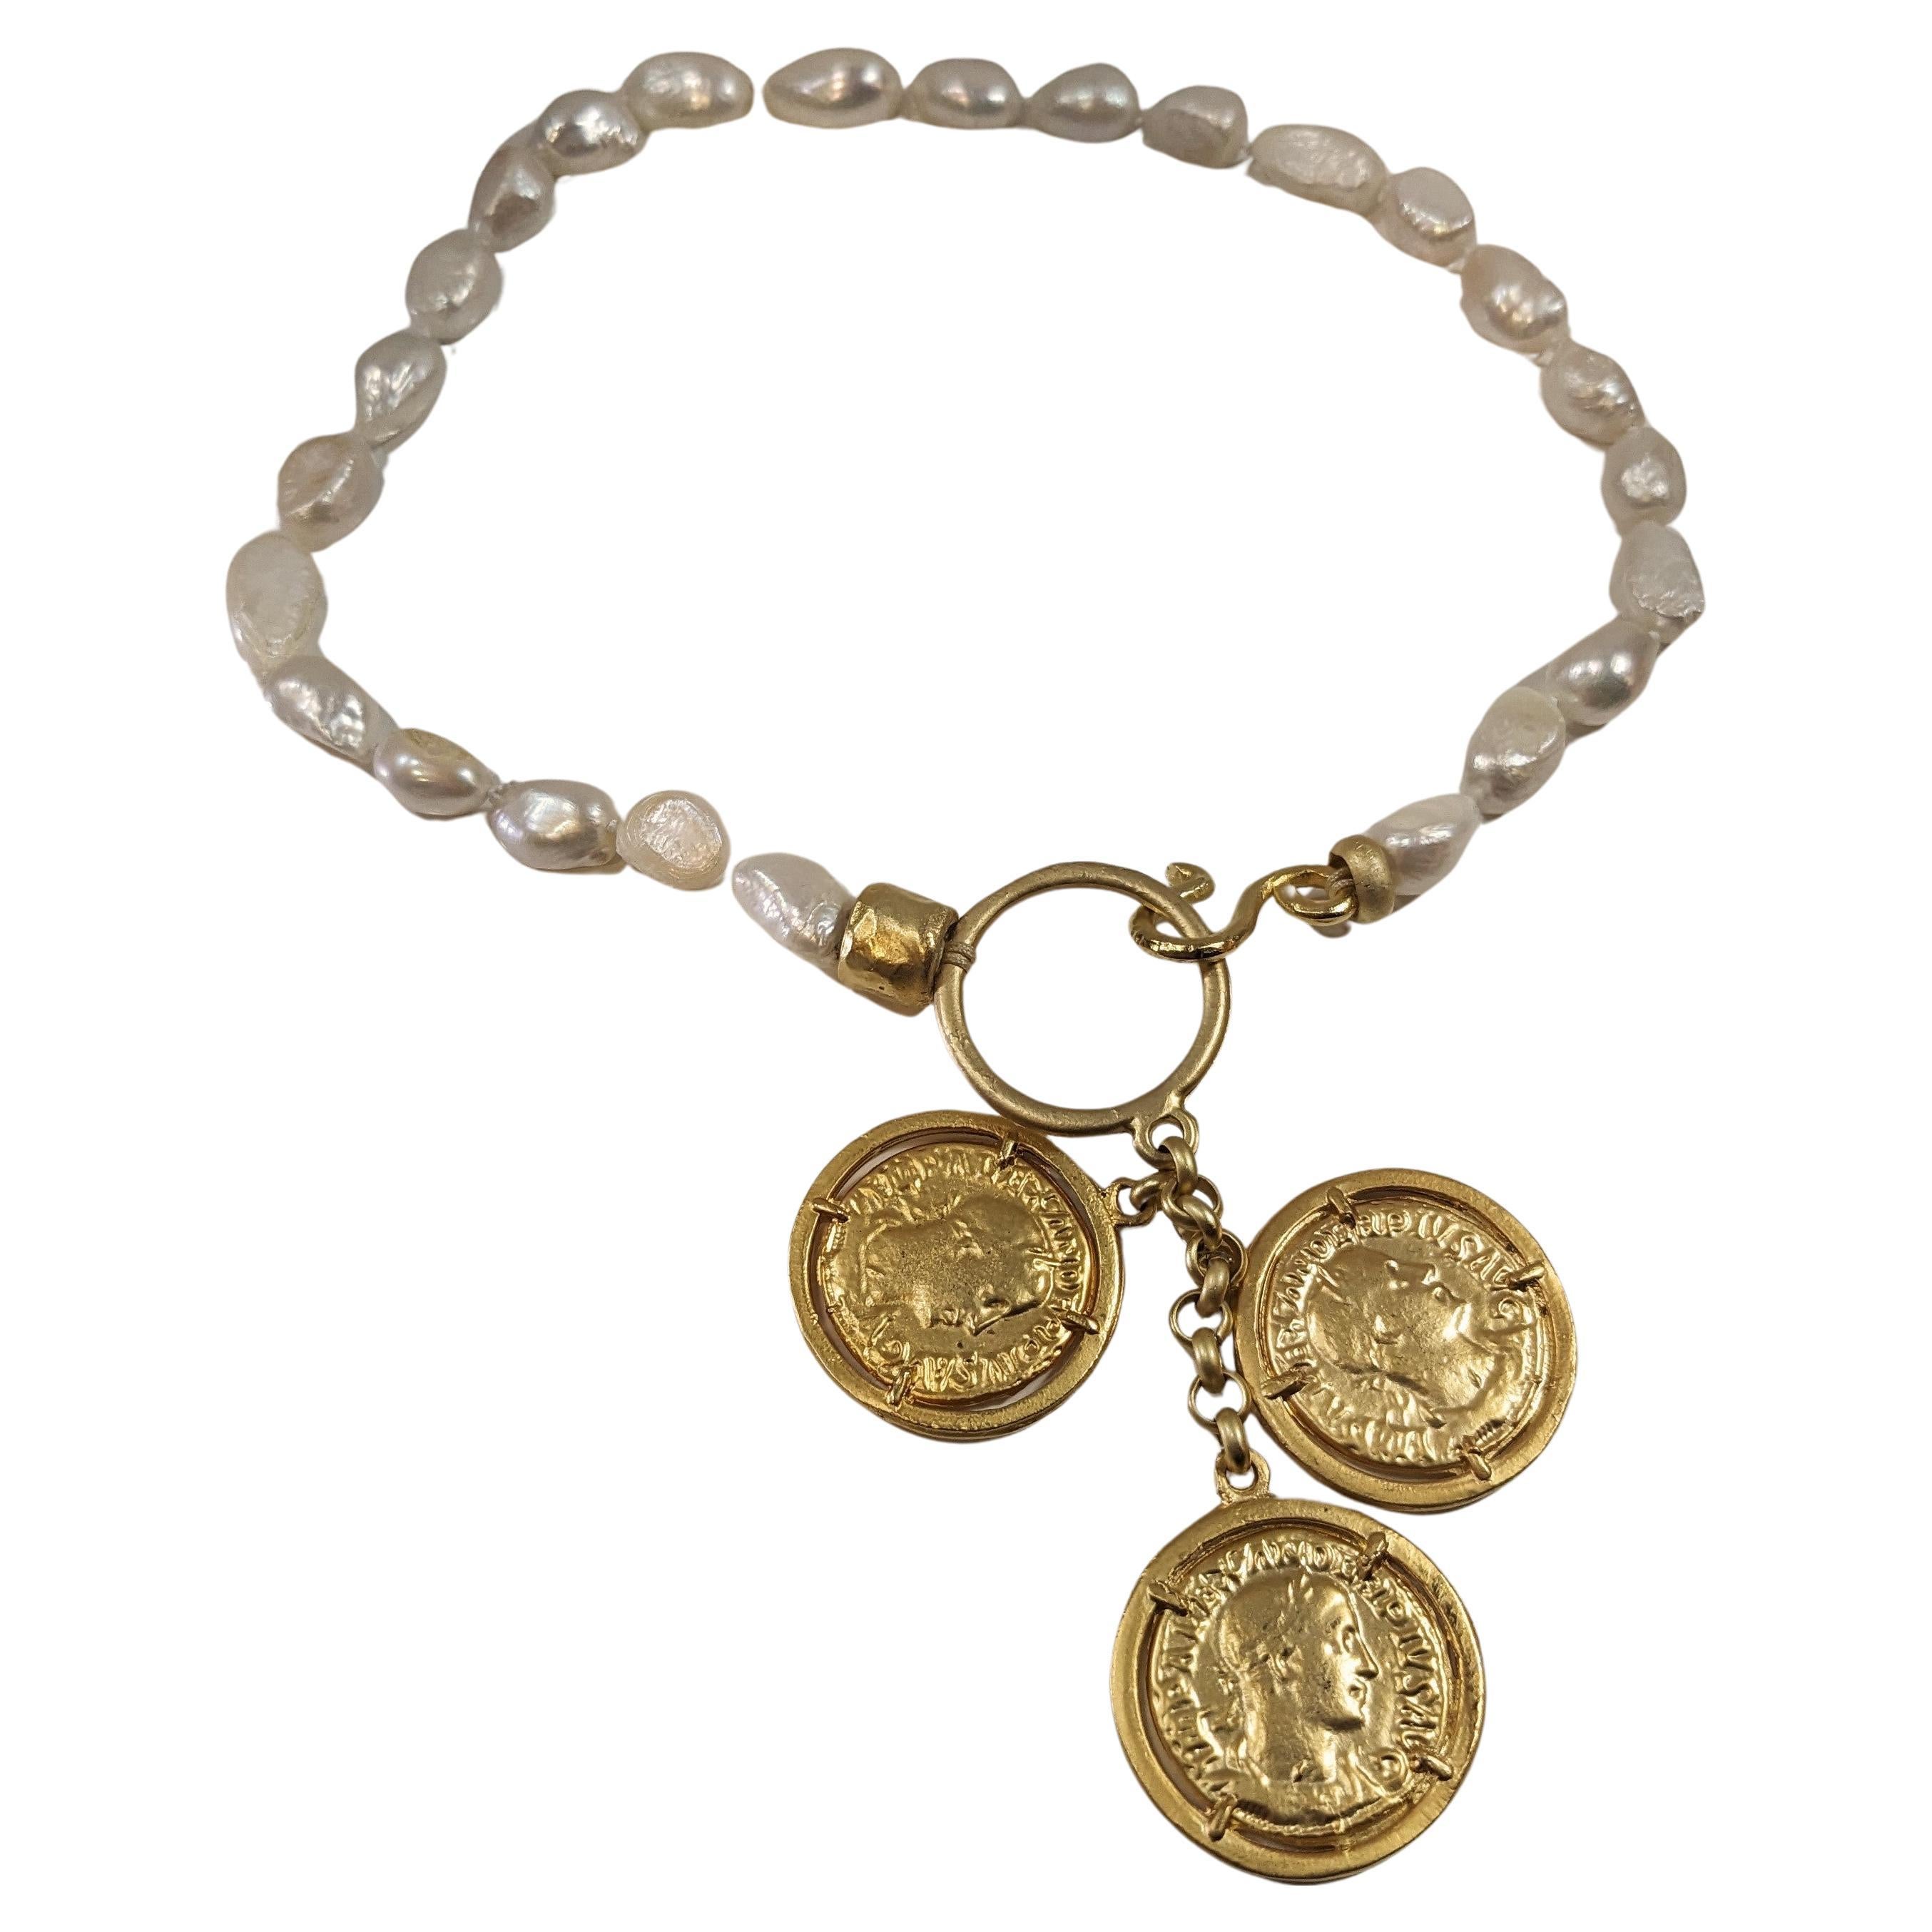  Short Necklace of White River Pearls with Central Hoop and Trio of Coins For Sale